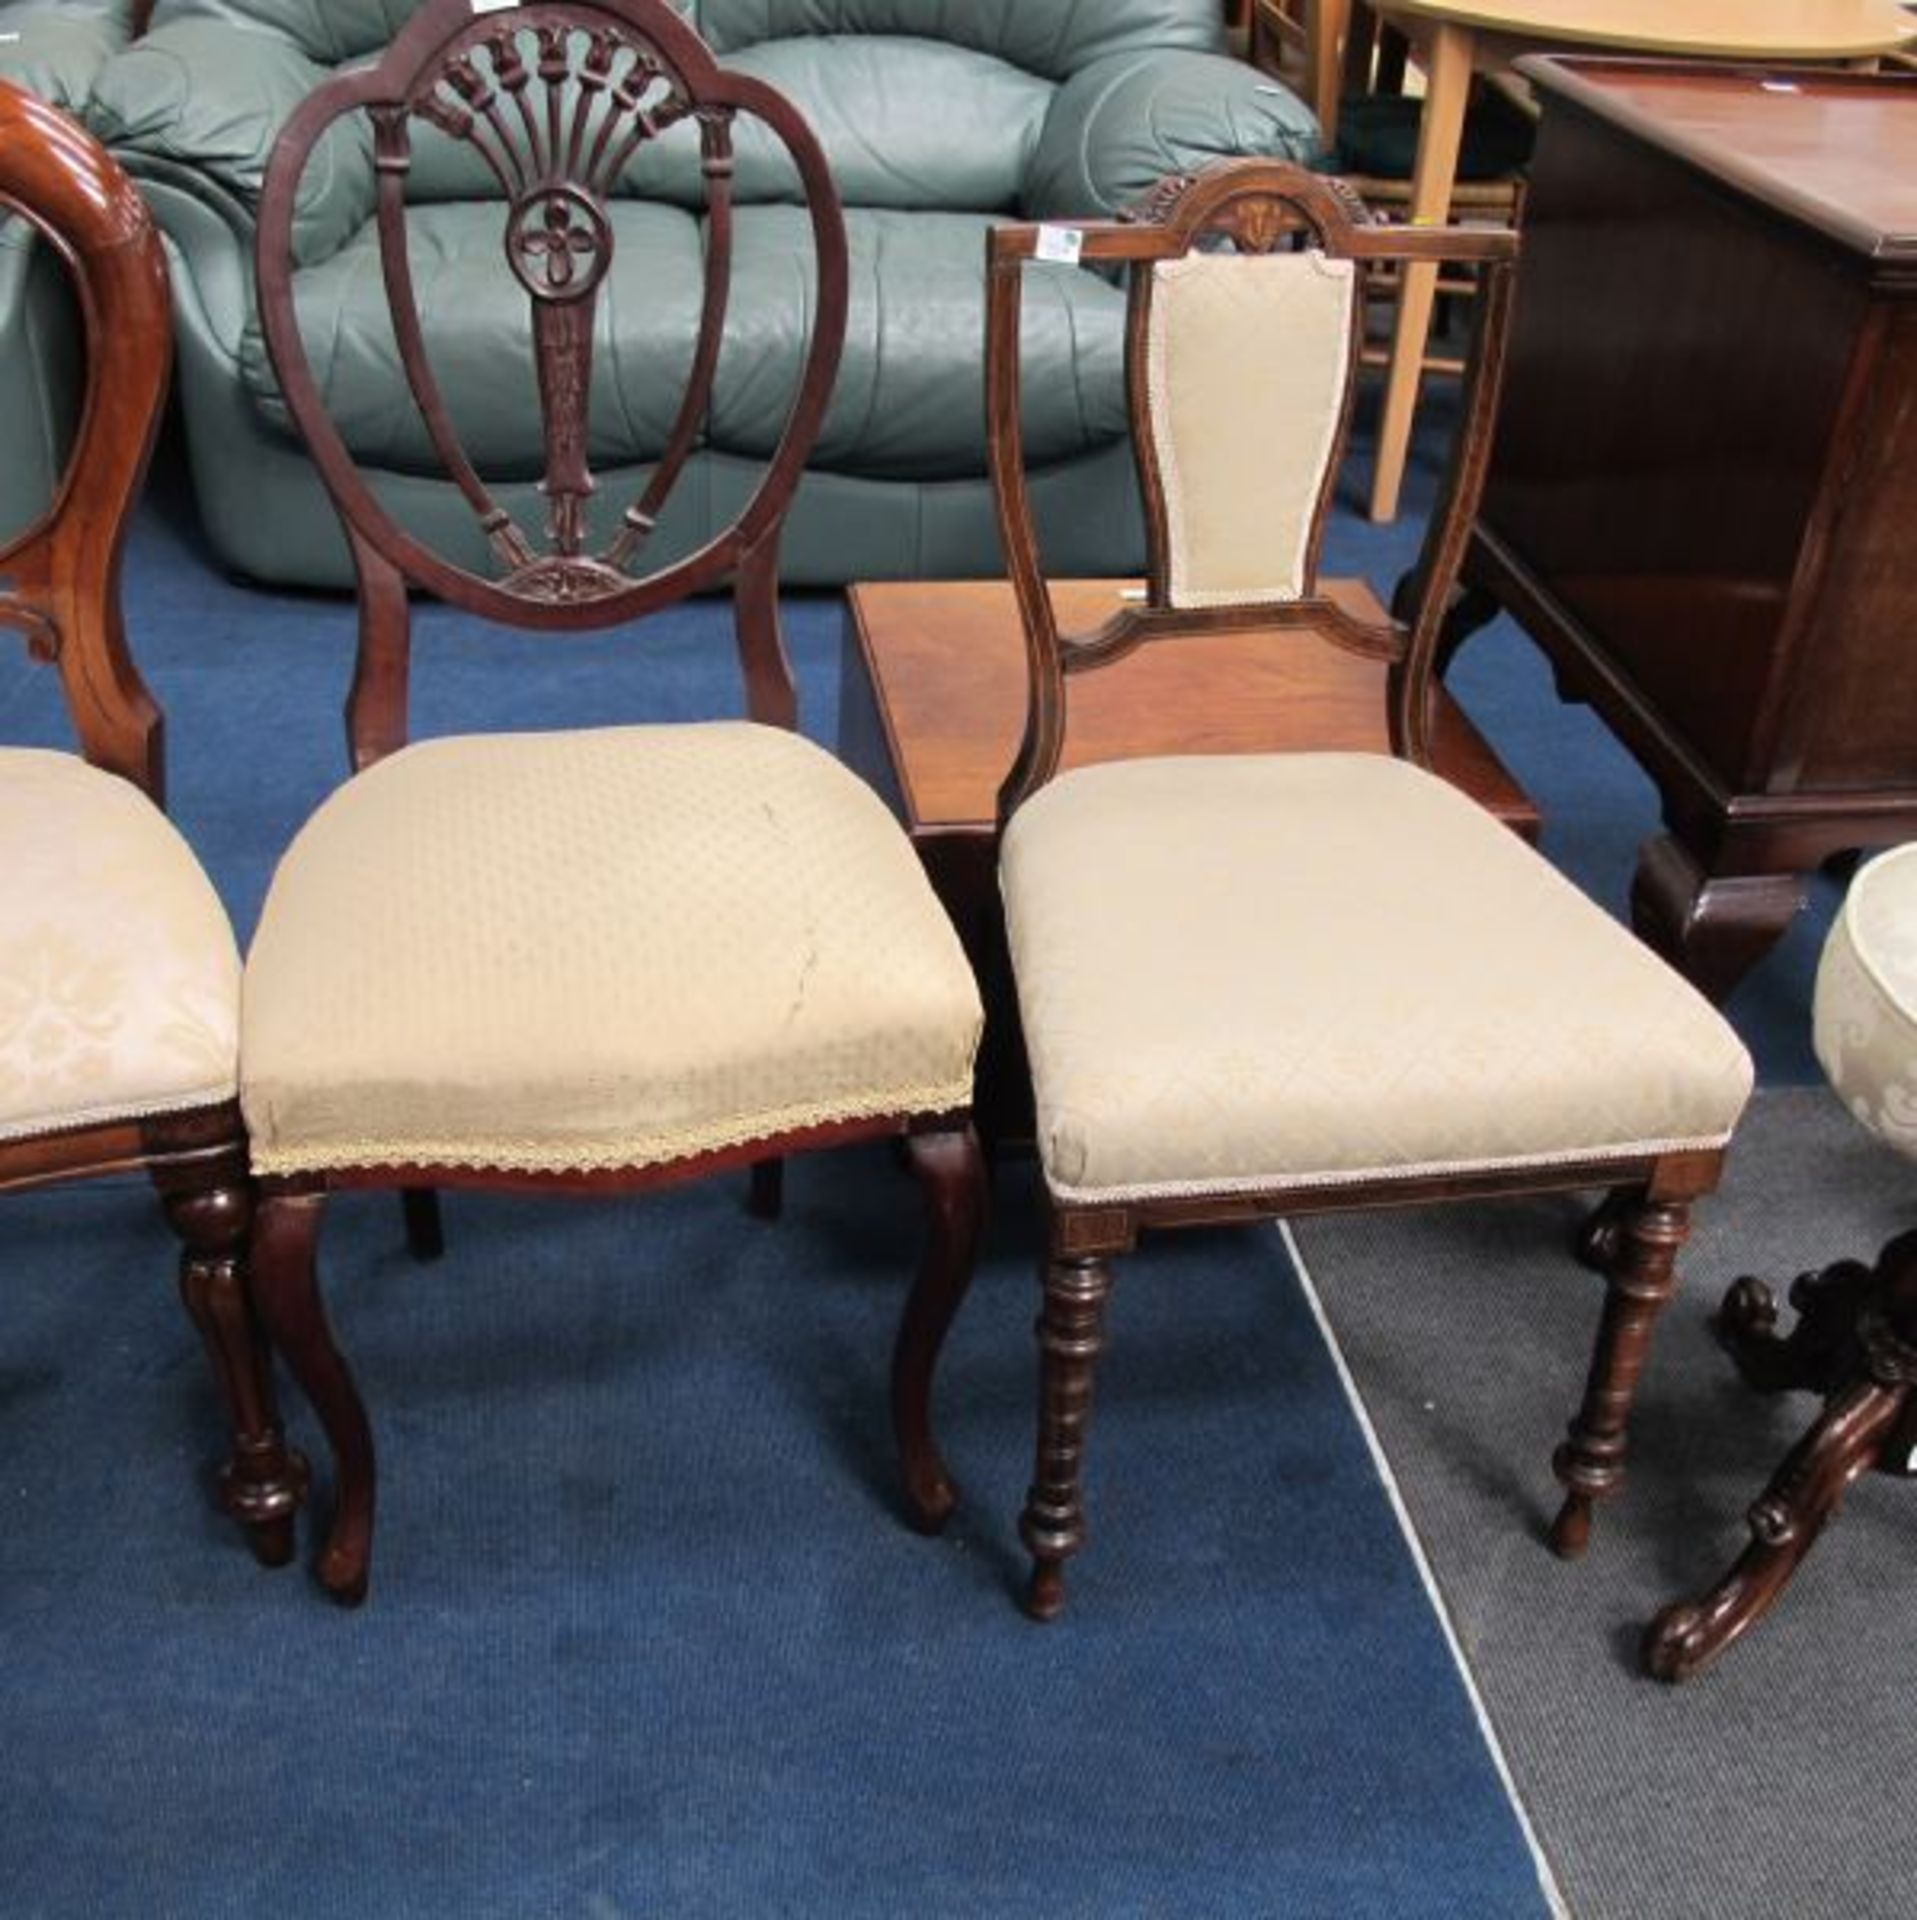 Edwardian Inlaid Rosewood Single Chair; Oval Back Single Chair and a Pair of Victorian Style Balloon - Image 2 of 2